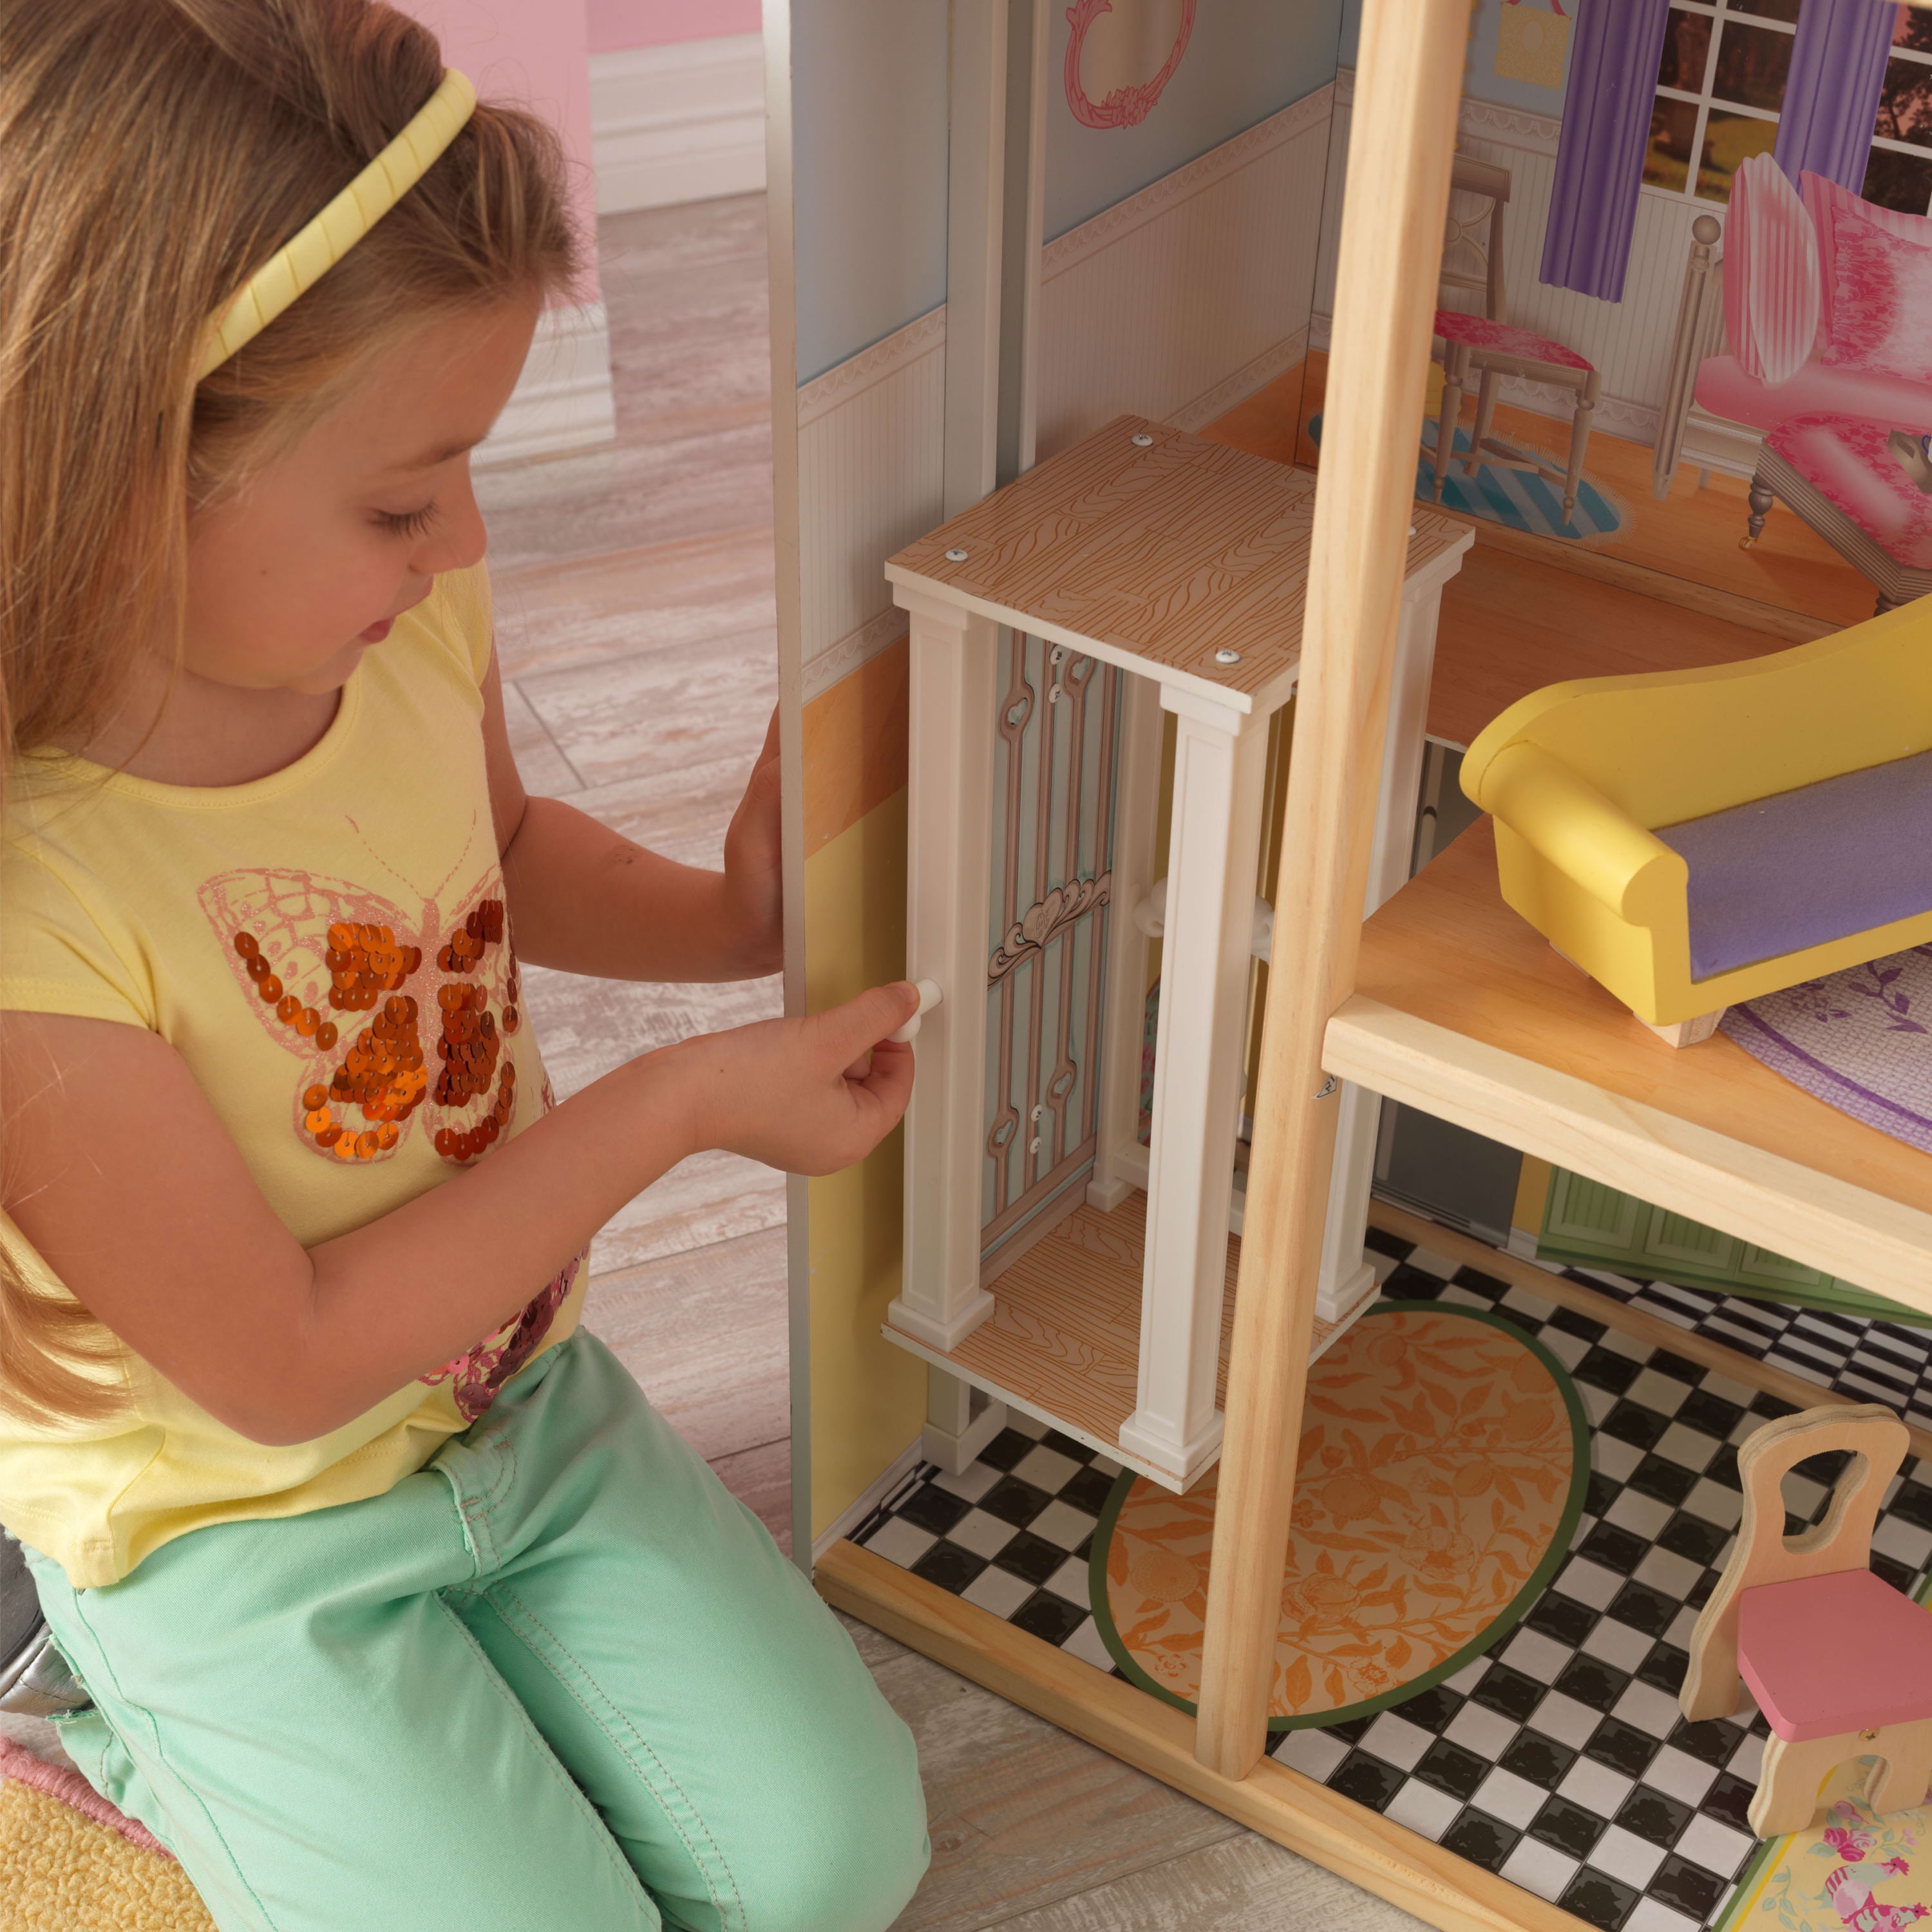 Dollhouse, Elevator, Accessories 4 Almost 10 Kaylee Stairs Tall with KidKraft Wooden and Feet